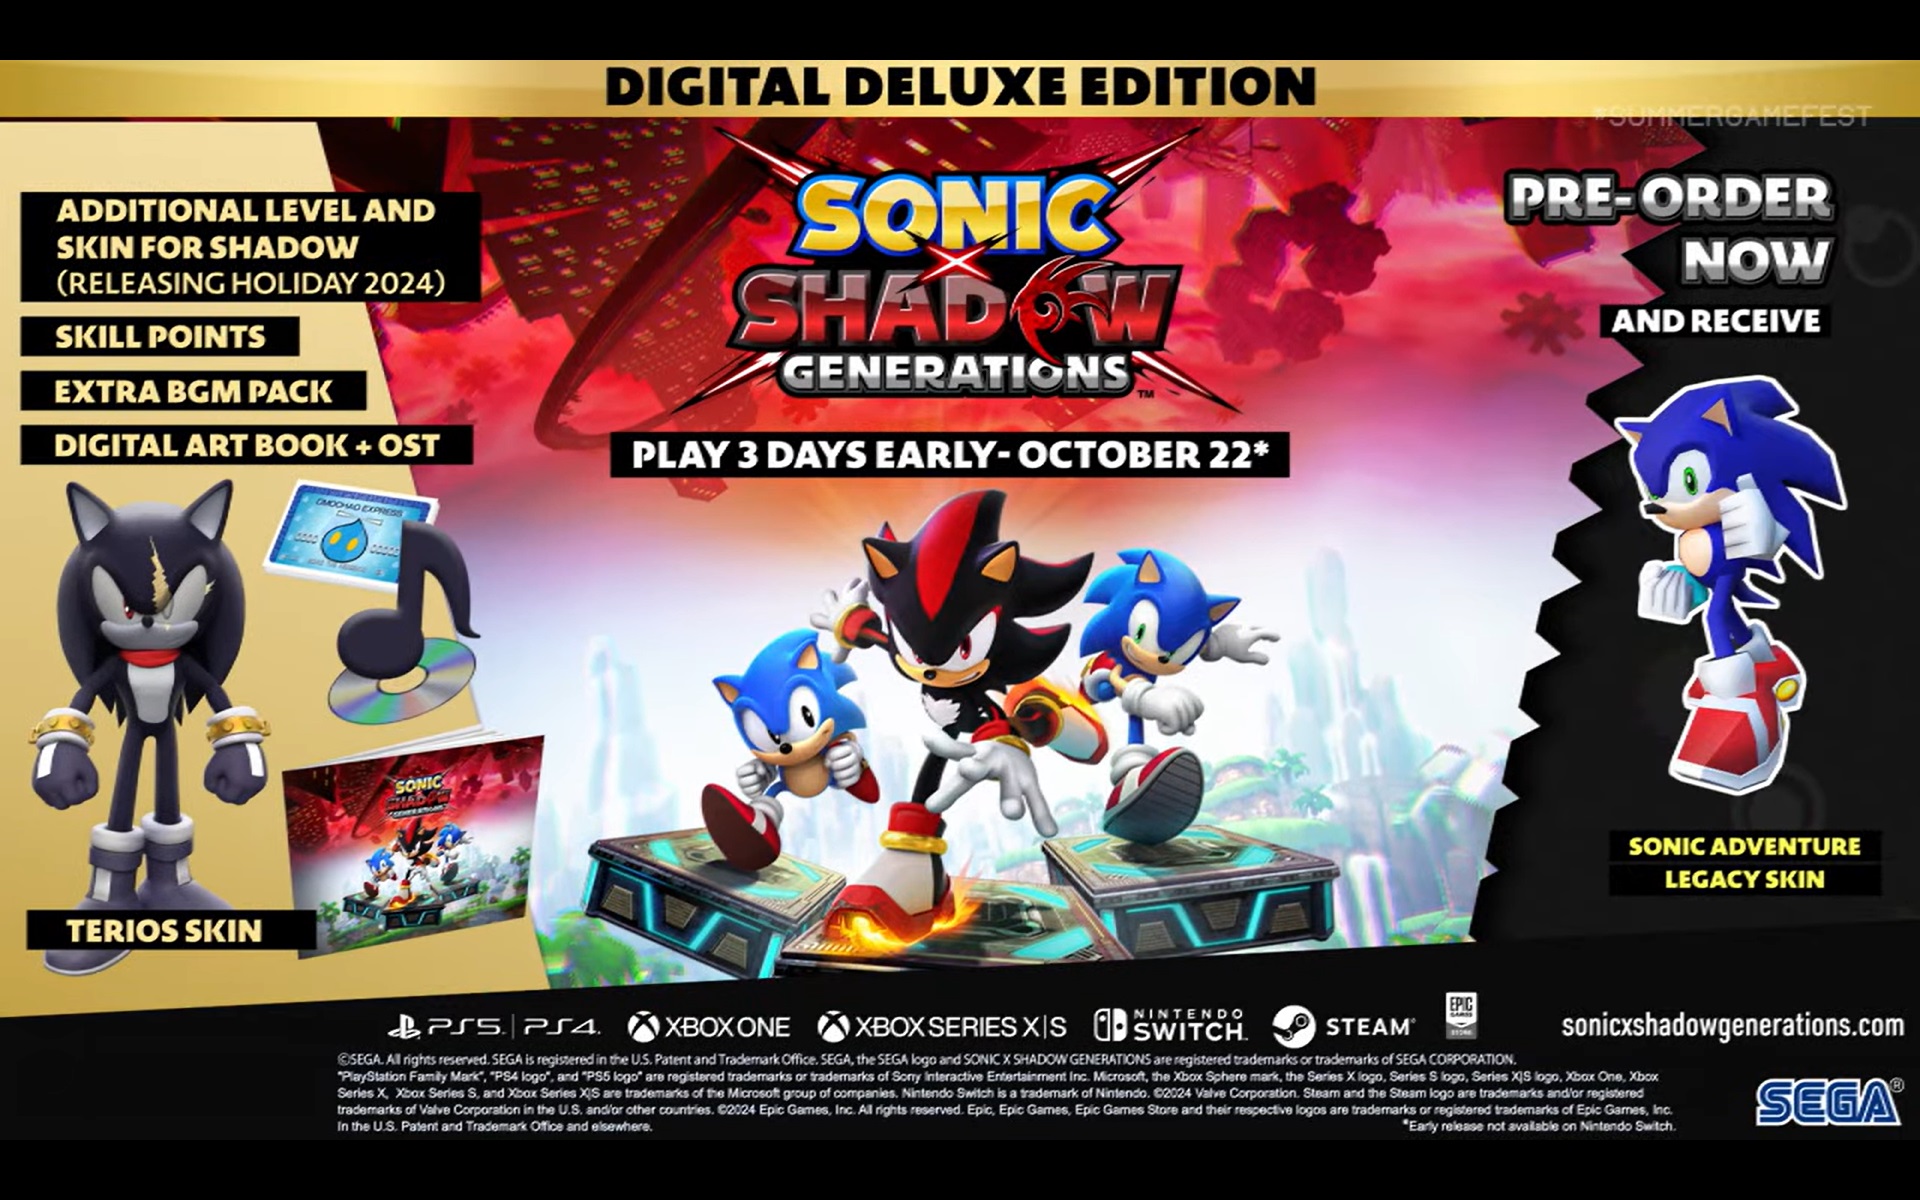 Sonic x Shadow Generations release date